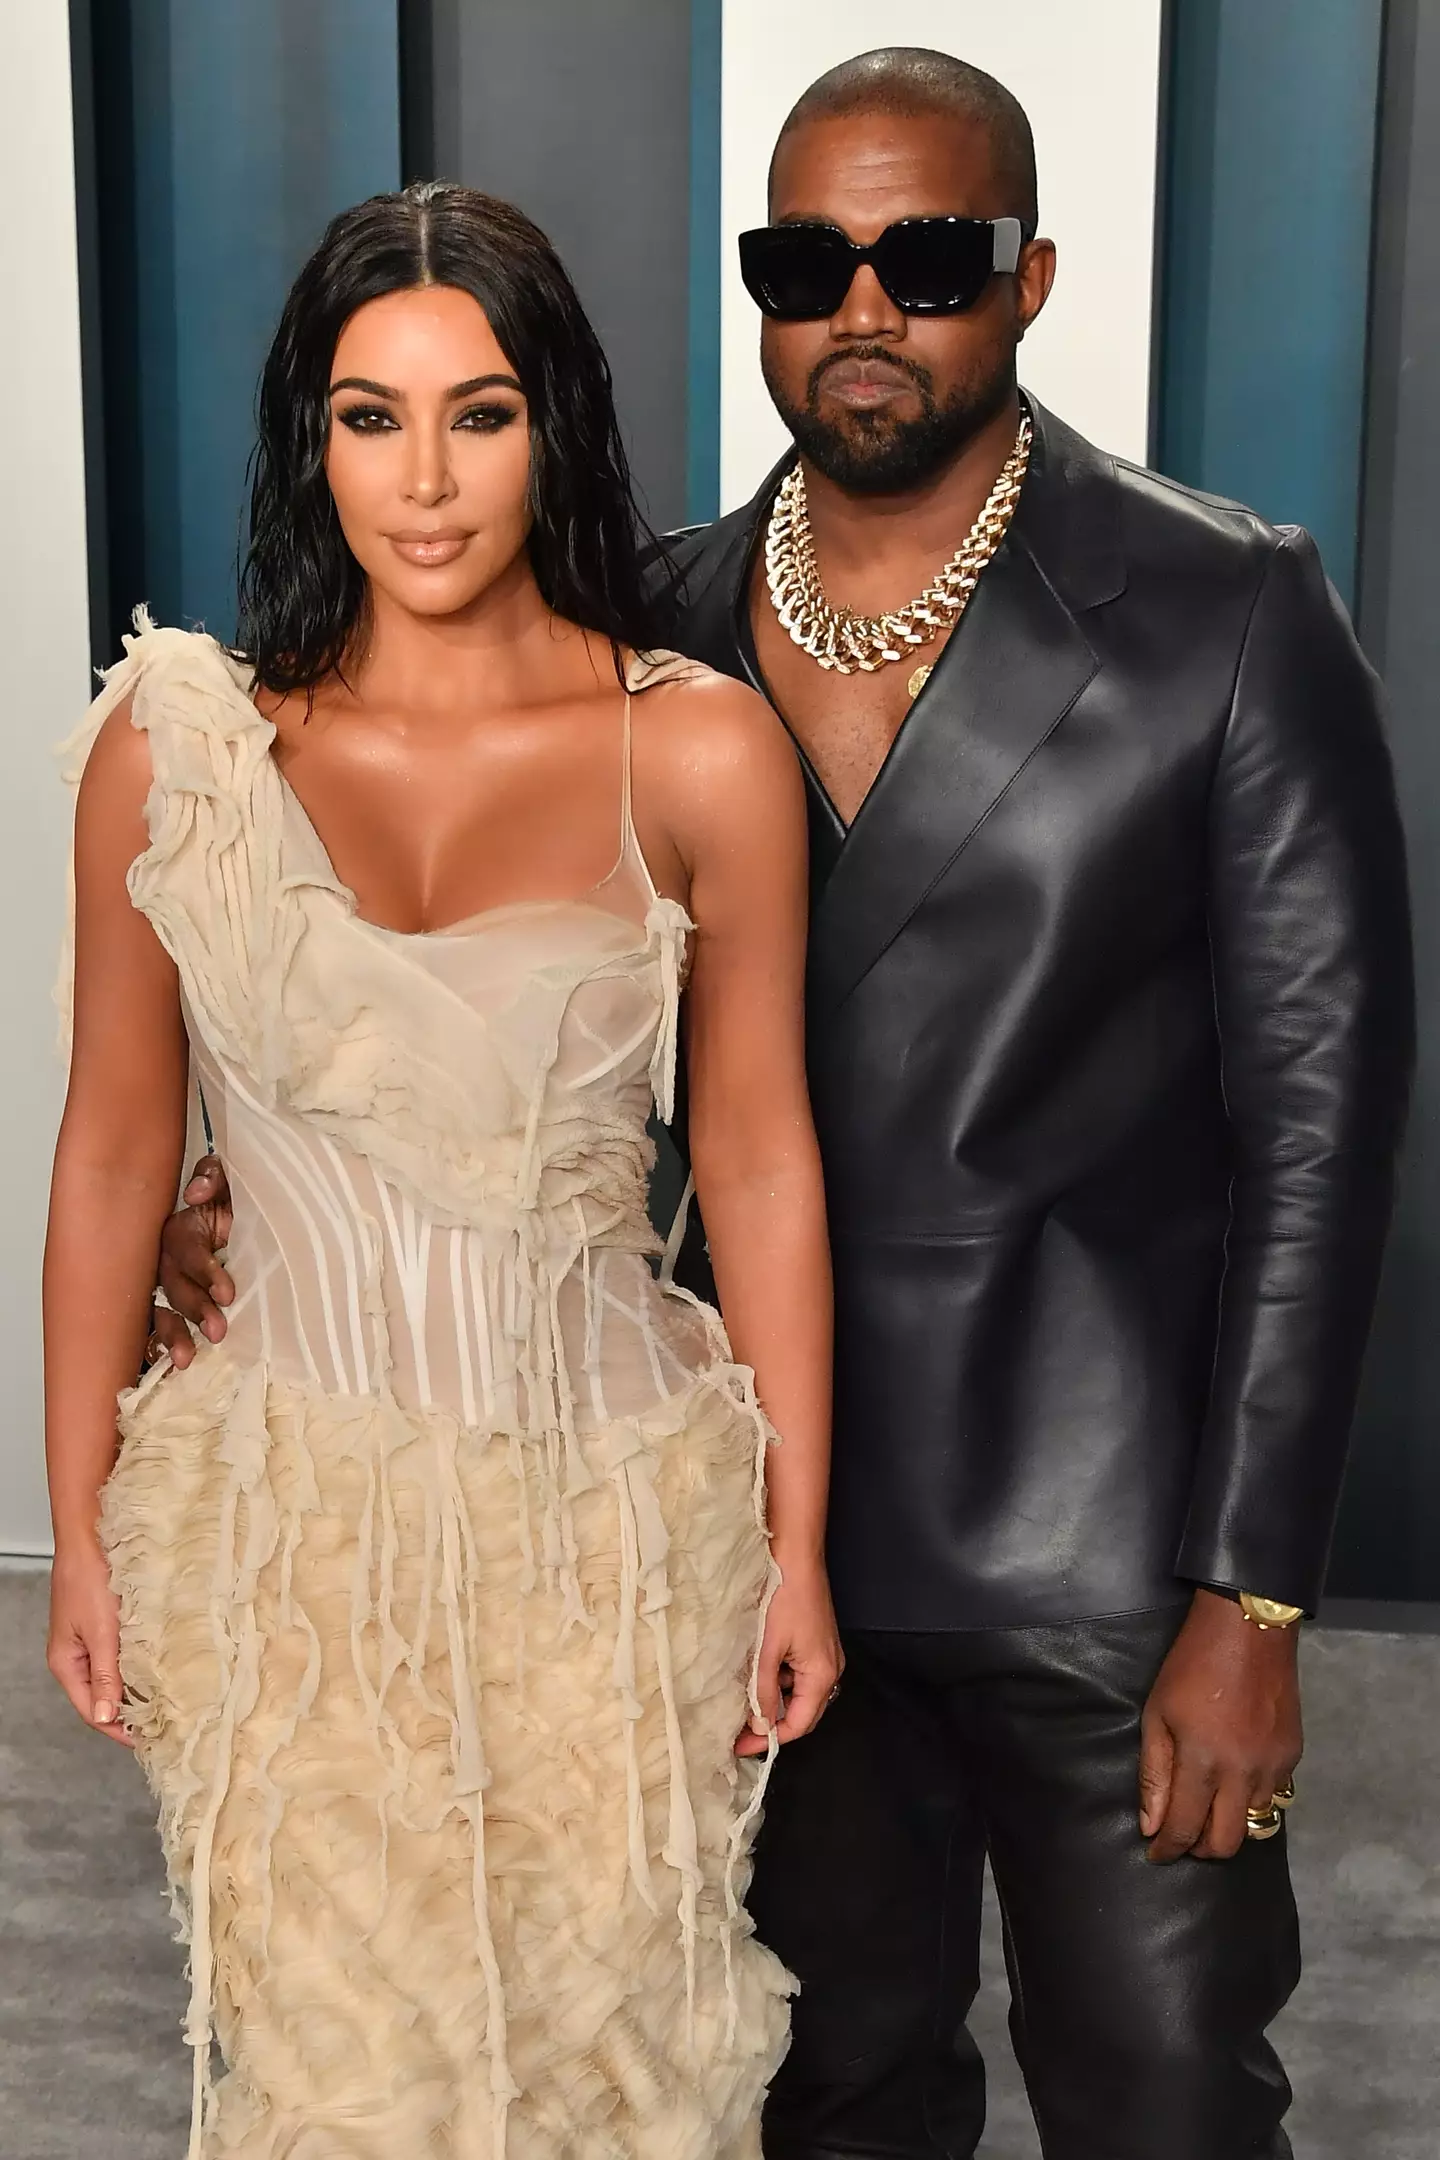 Kanye West and Kim Kardashian were married for 7 years.